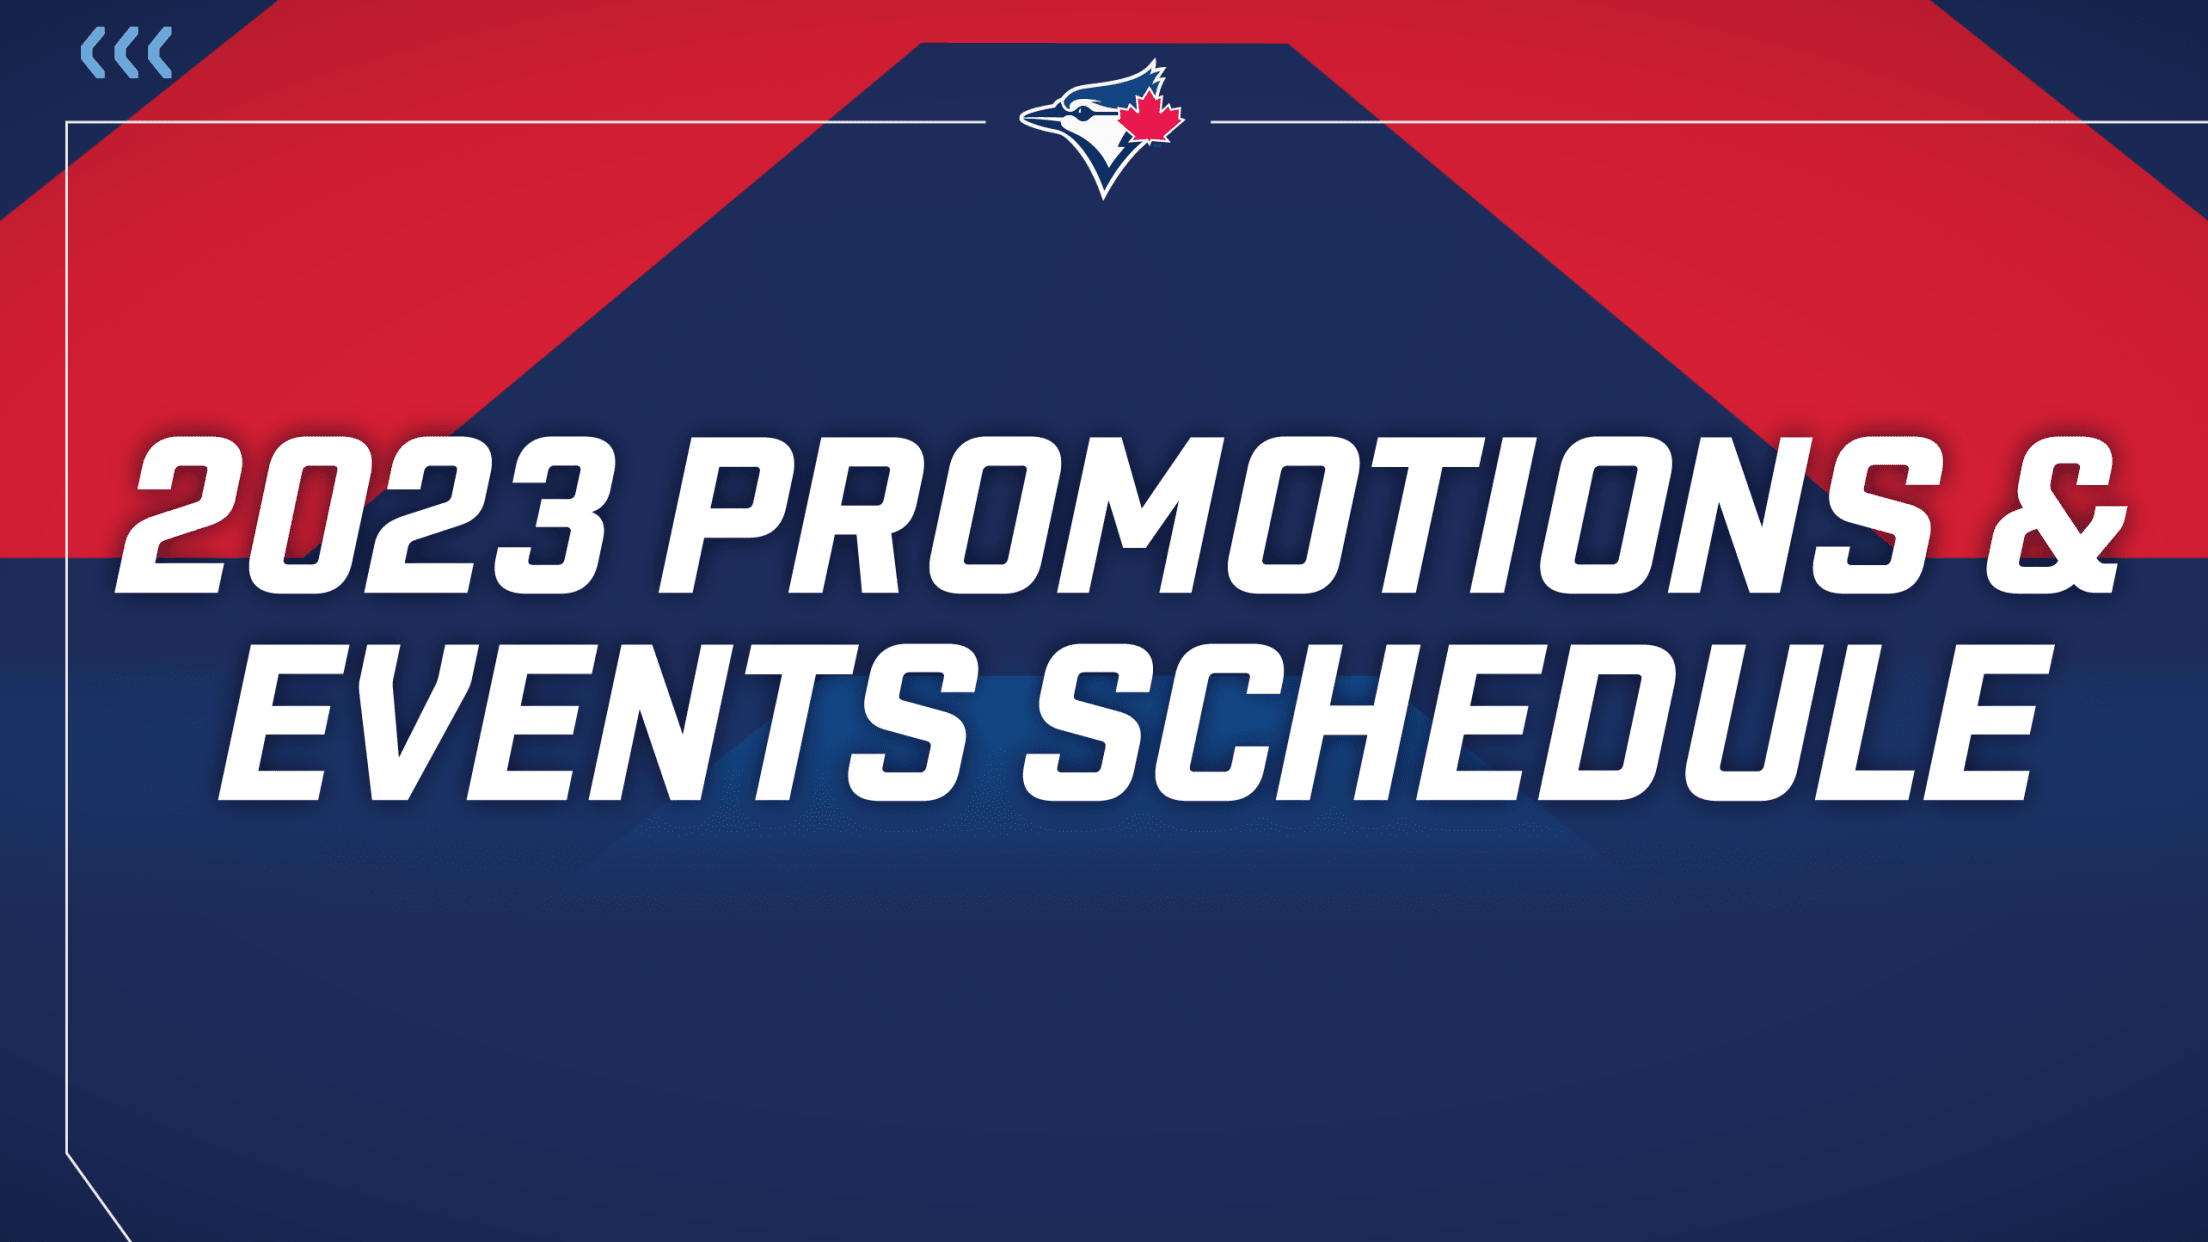 Promotions and Events Schedule, Tickets